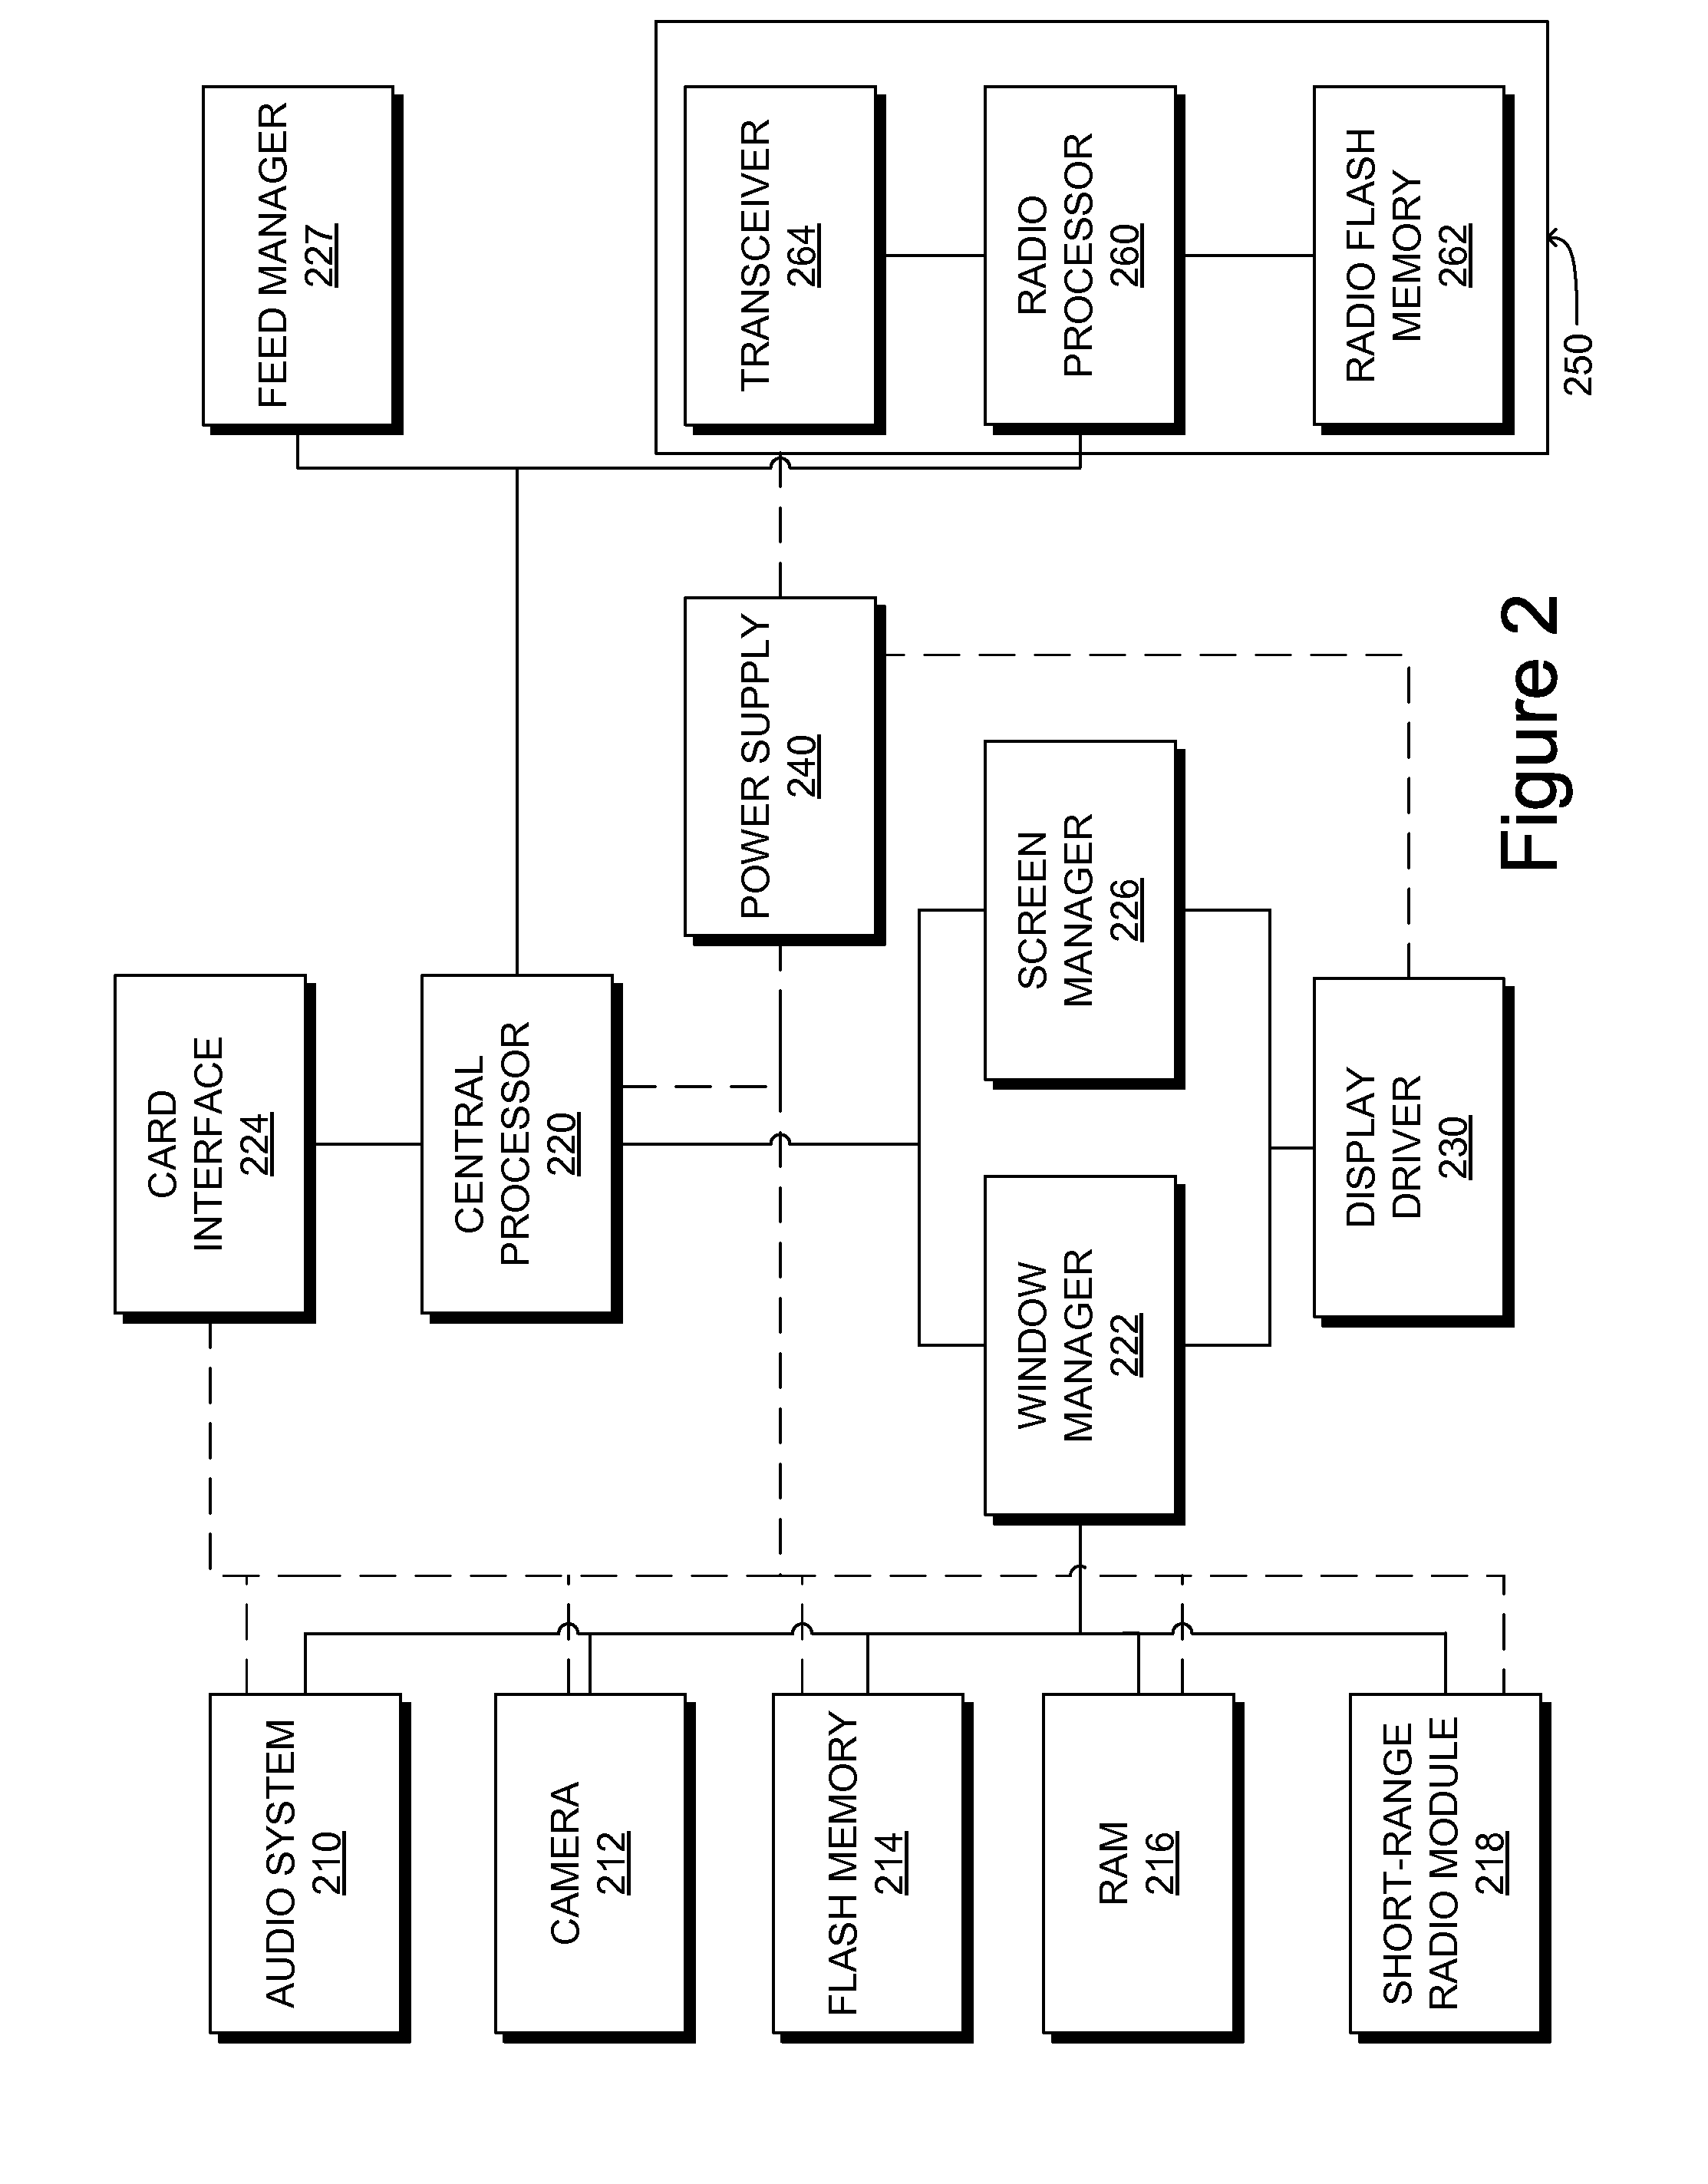 System and method for prompting users to subscribe to web feeds based on web browsing activity